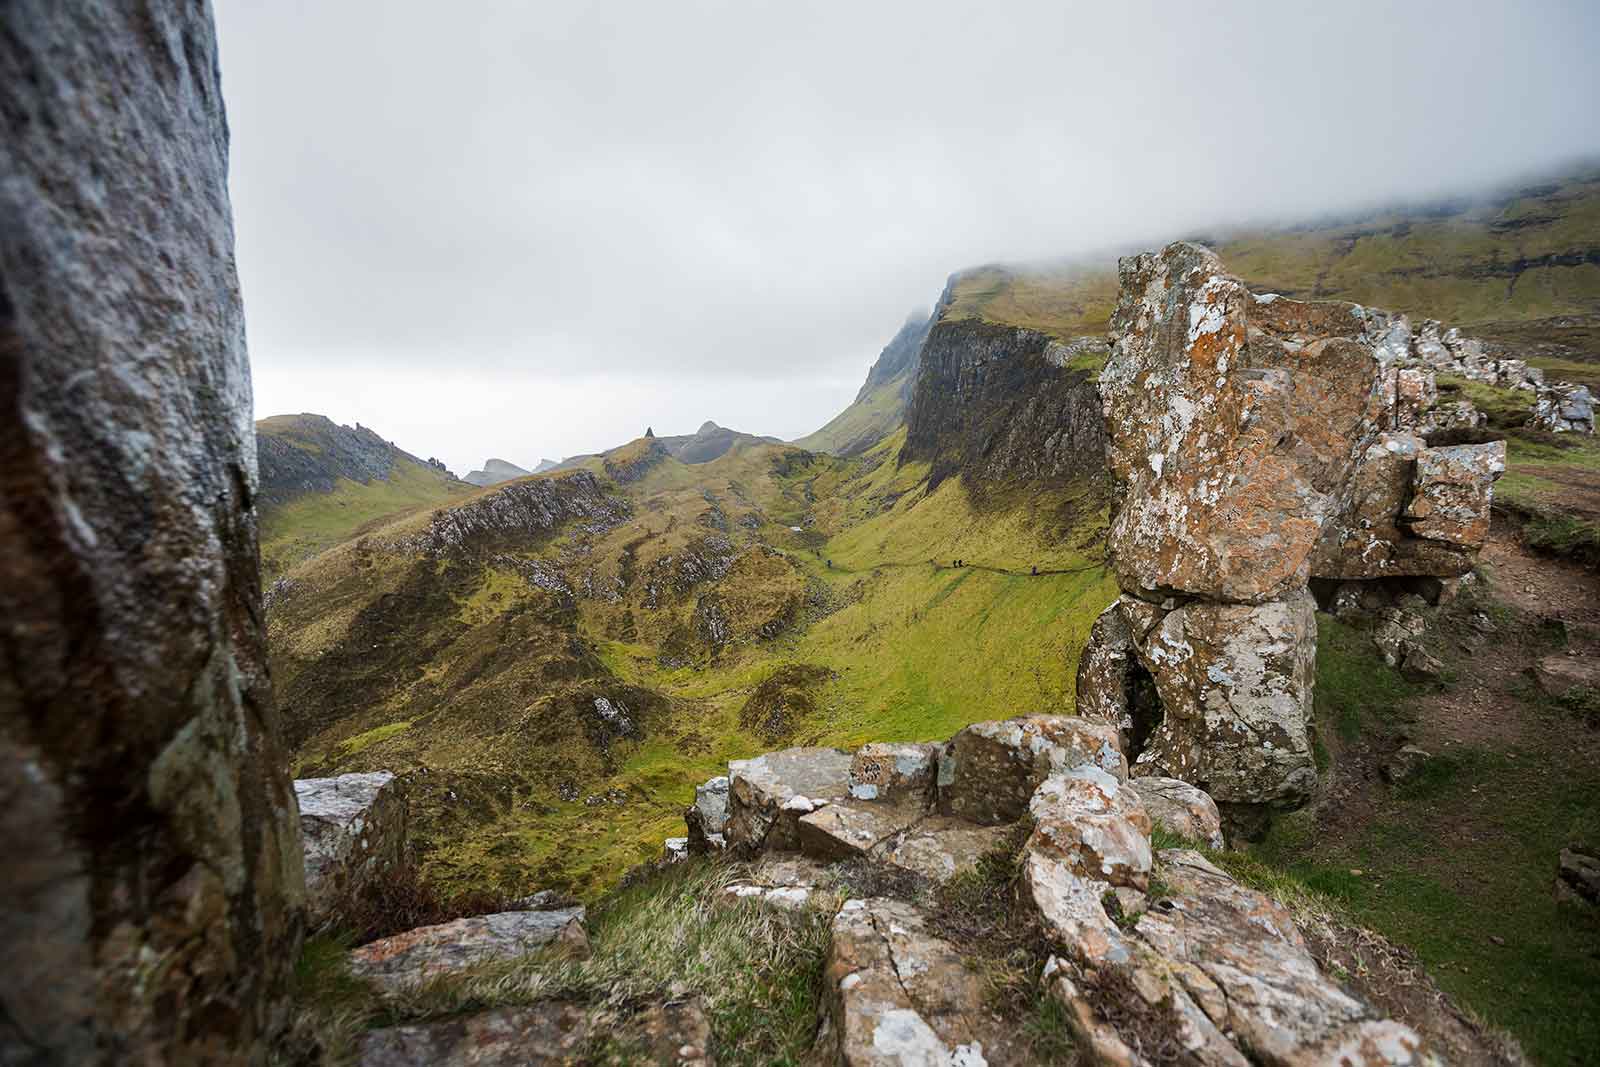 One of the most beautiful hikes in the world, with the most stunning landscape: The Quiraing in Scotland.